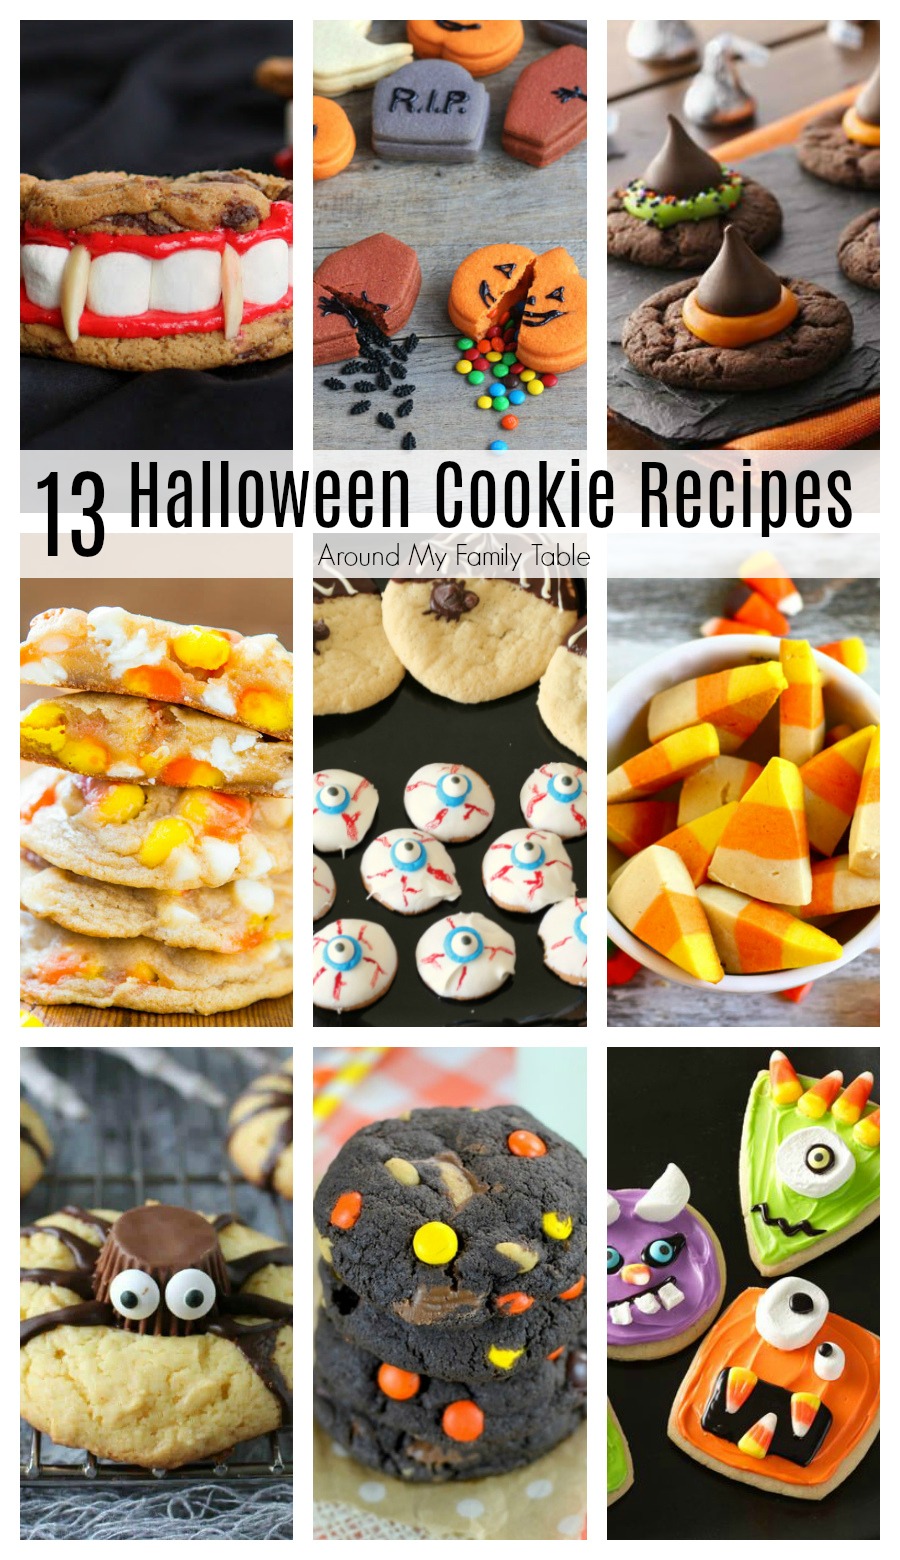 These are the perfect Halloween Cookie Recipes for your October parties and get togethers!